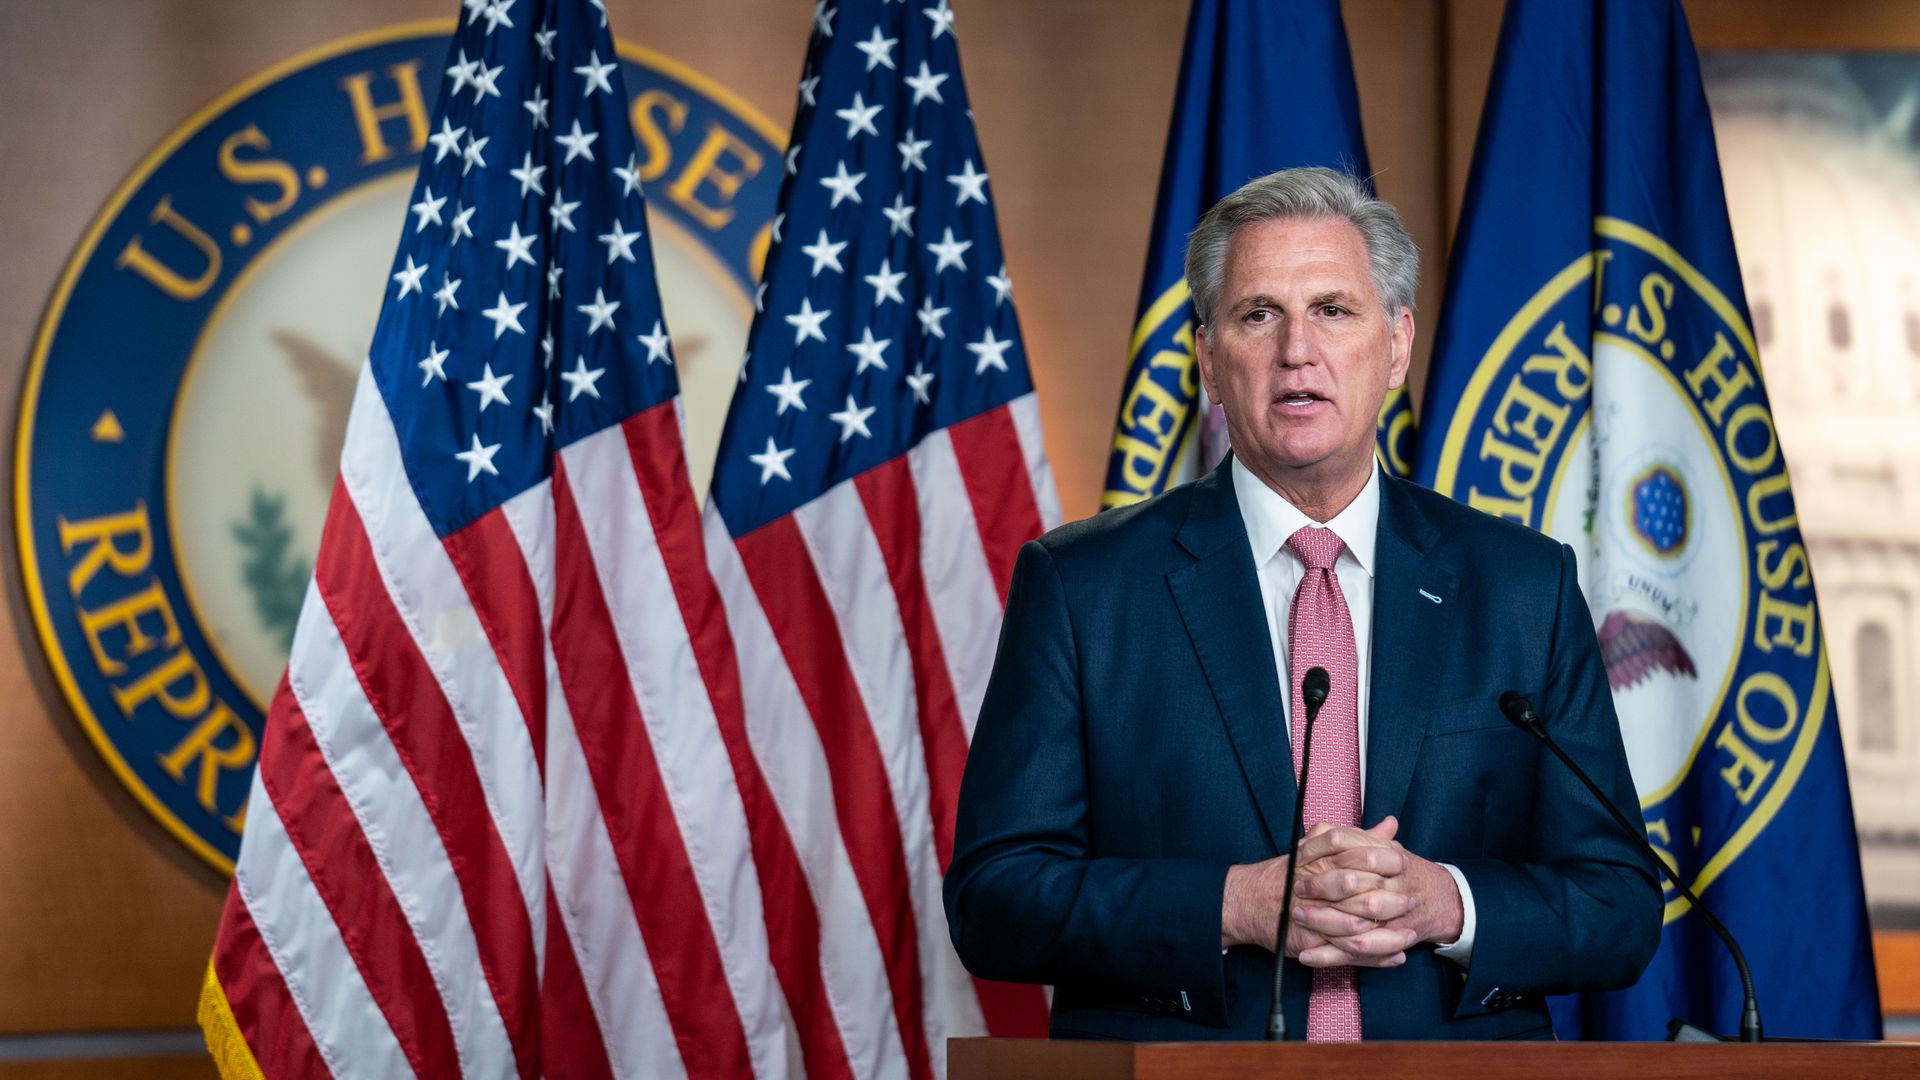 House Minority Leader Kevin McCarthy is seen speaking during his weekly news conference.